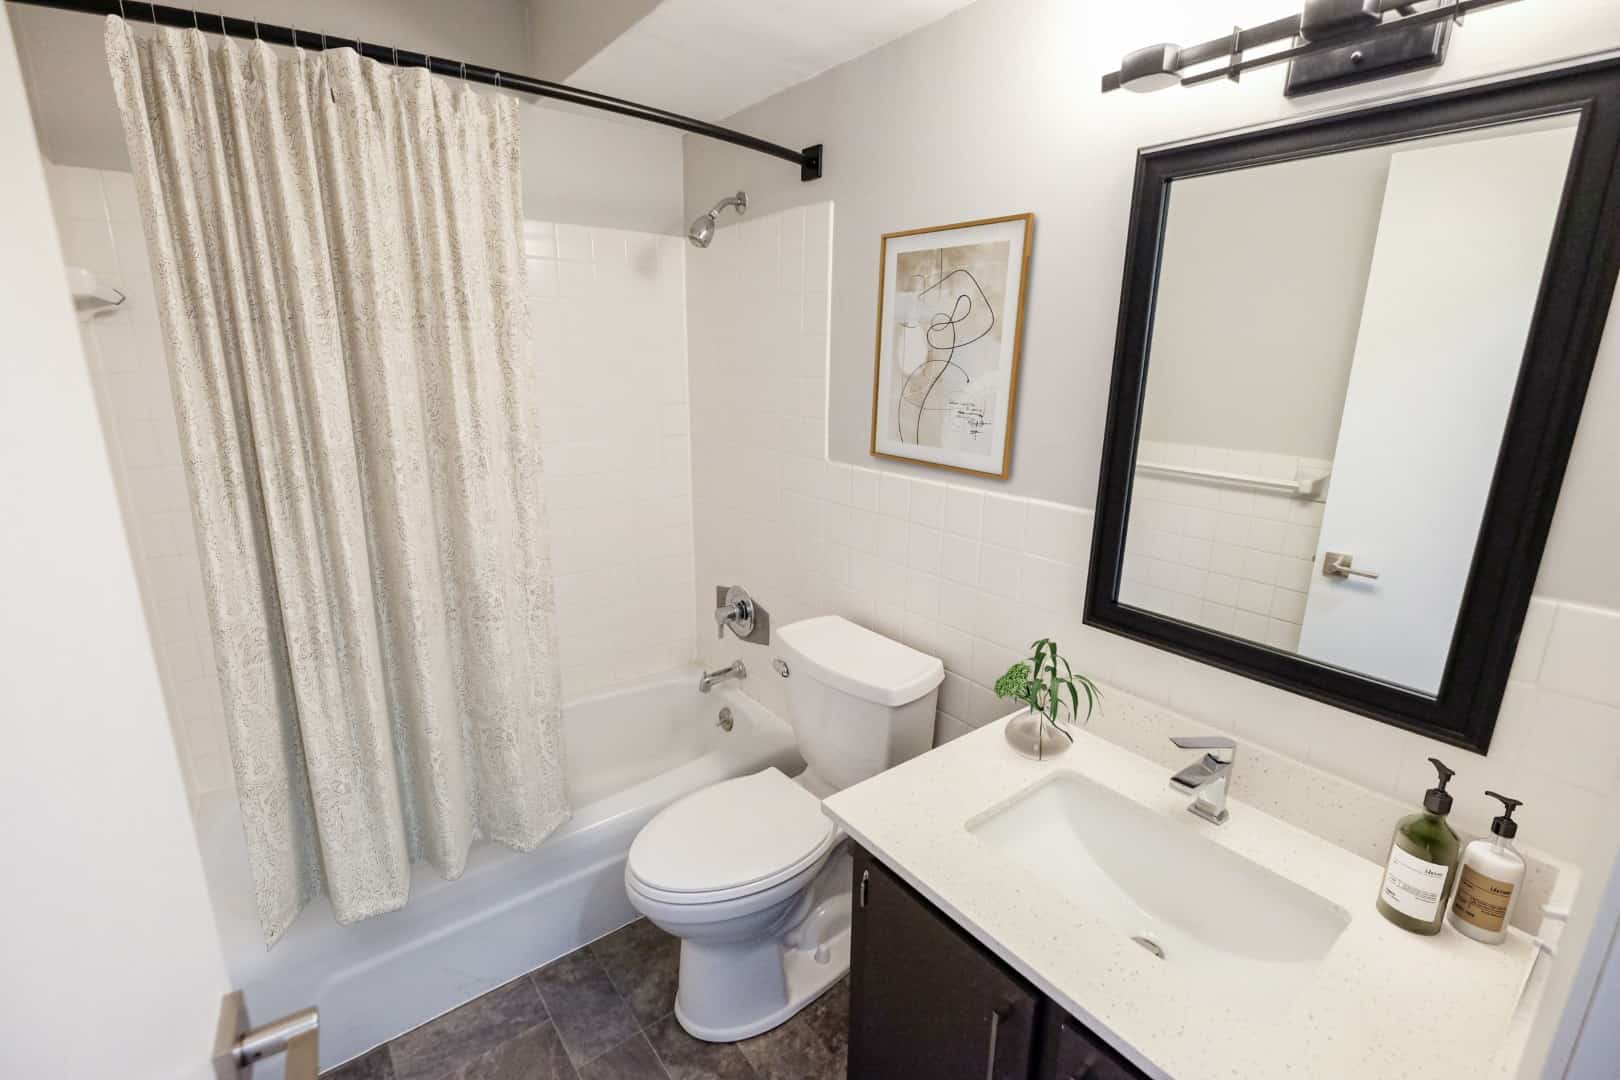 Modern finishes like subway tile and a framed mirror highlight the stylish life-style at The Concord. 